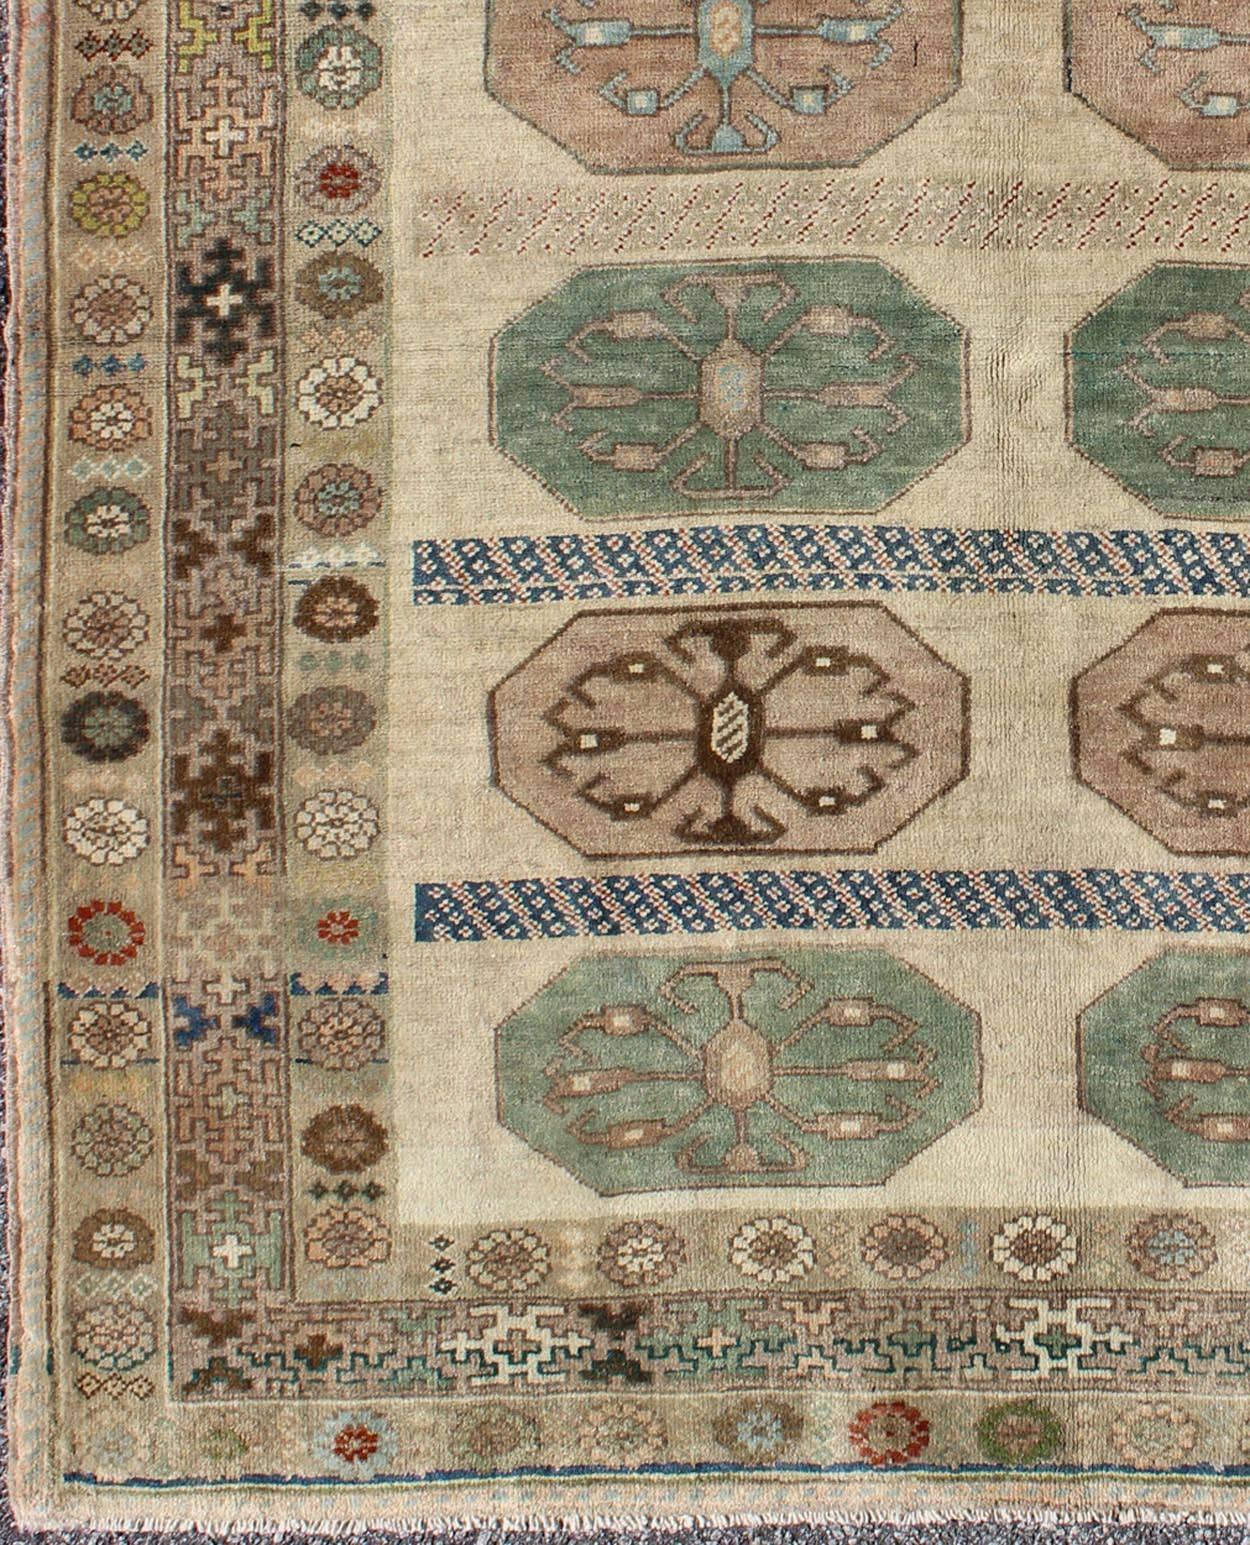 This vintage Turkish Oushak rug (circa mid-20th century) features a unique blend of colors and an intricately beautiful design. The central medallions are arranged in horizontal lines and consist of geometric-tribal designs. The various shades of